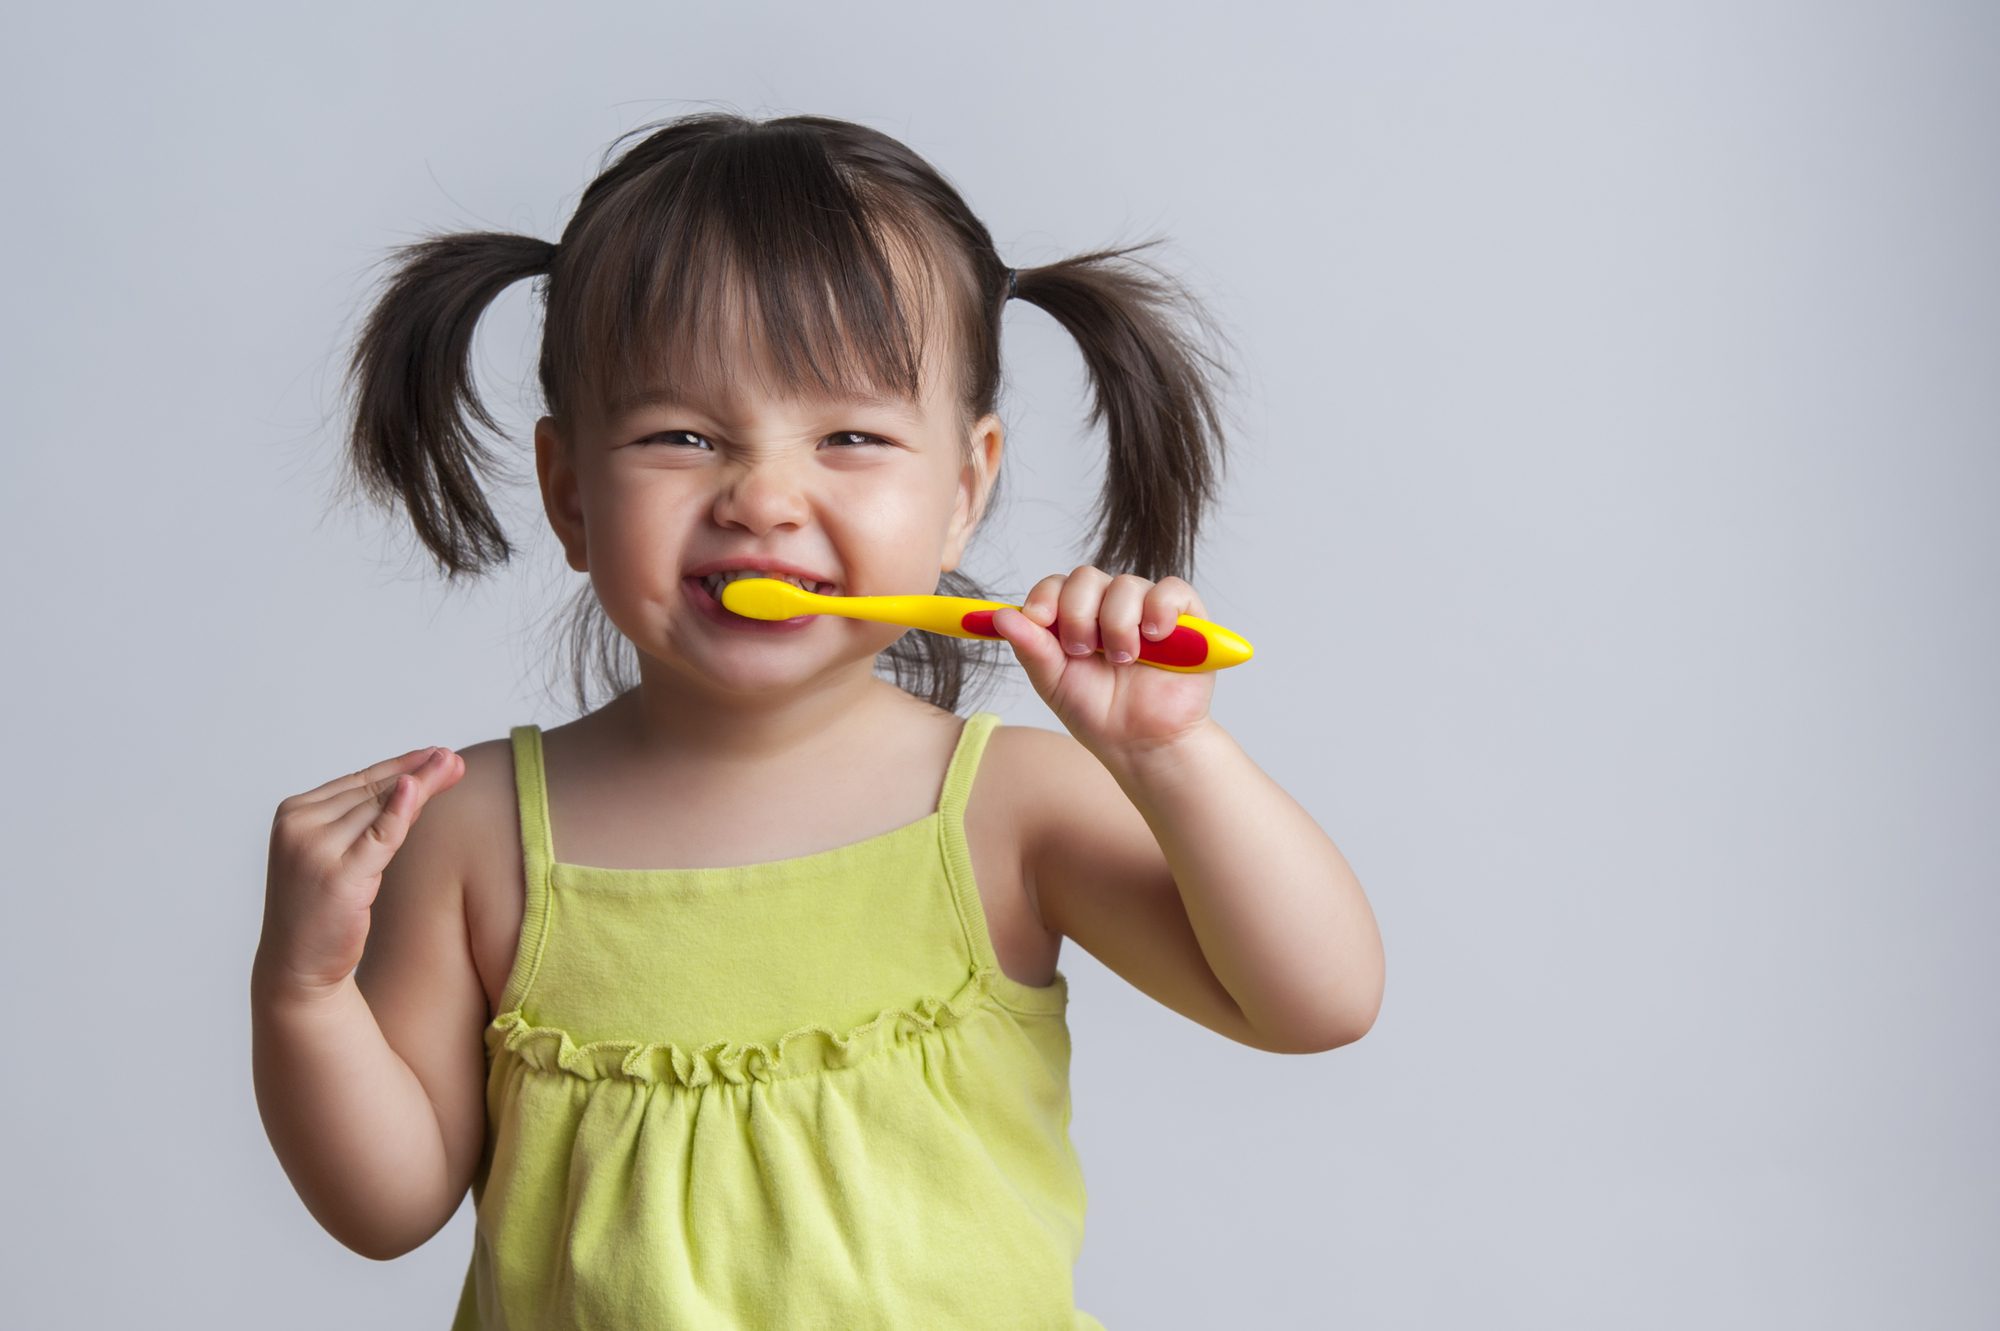 Toddler smiling while brushing her teeth as part of her daily dental hygiene routine